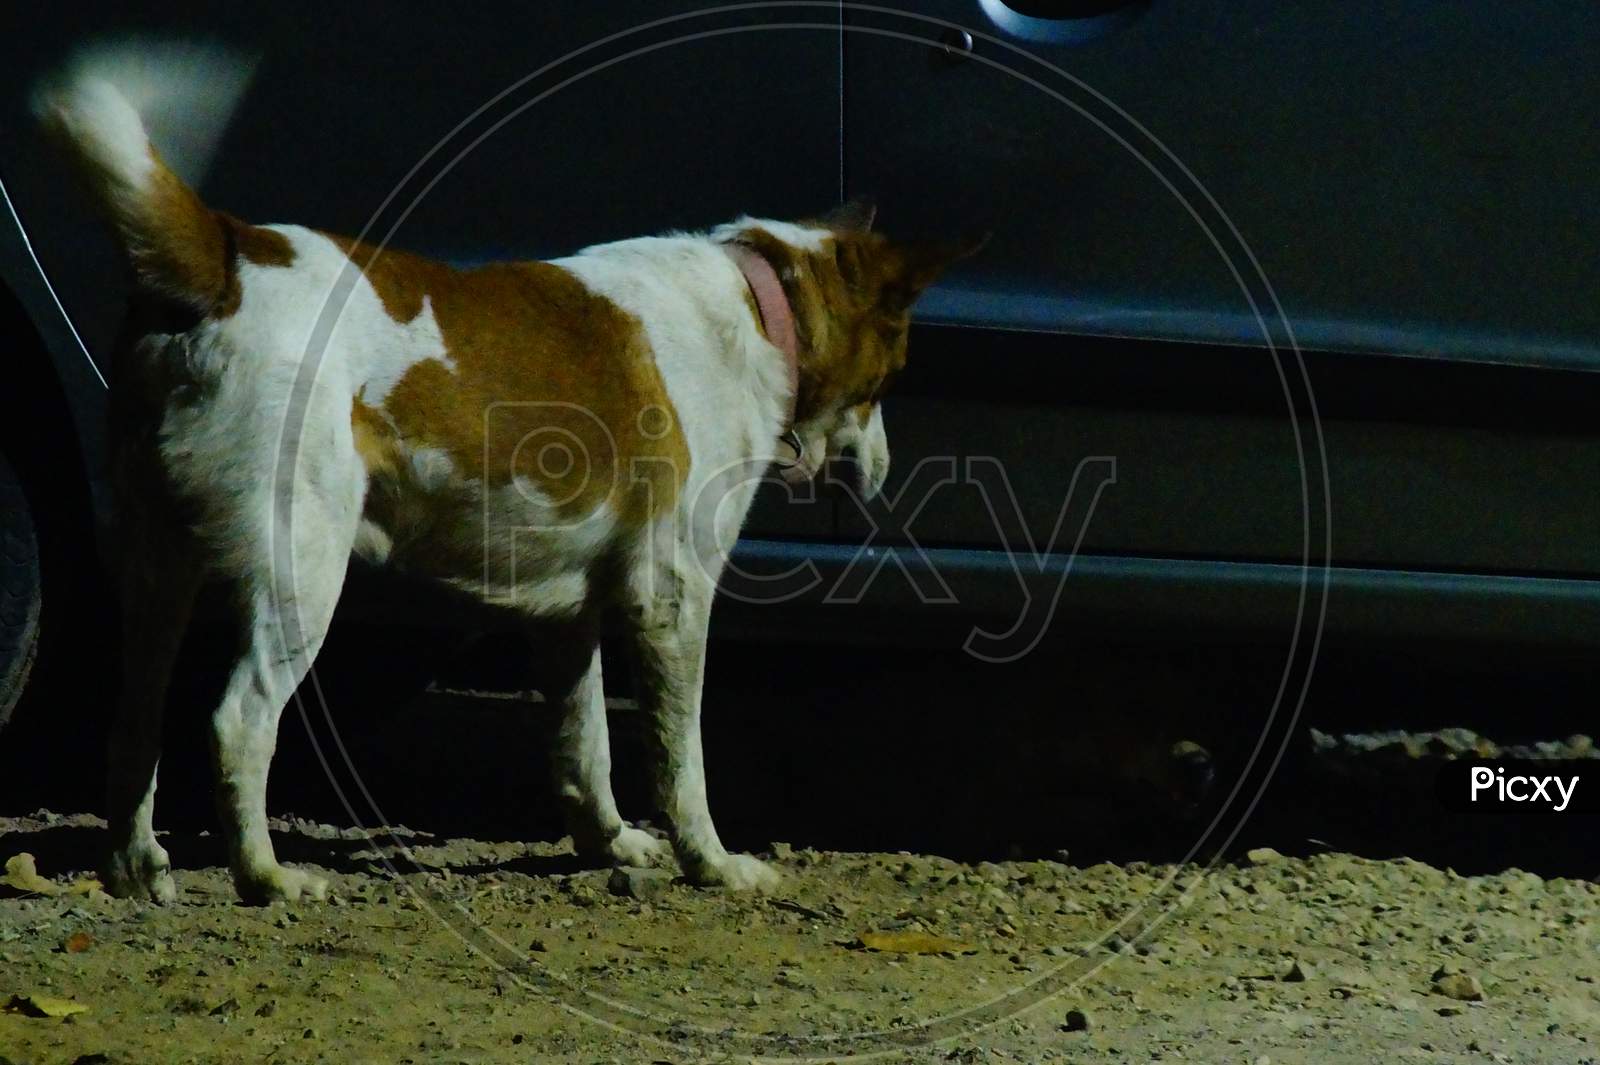 Male Dog Bobby waiting for female dog to come out from under the Car for mating